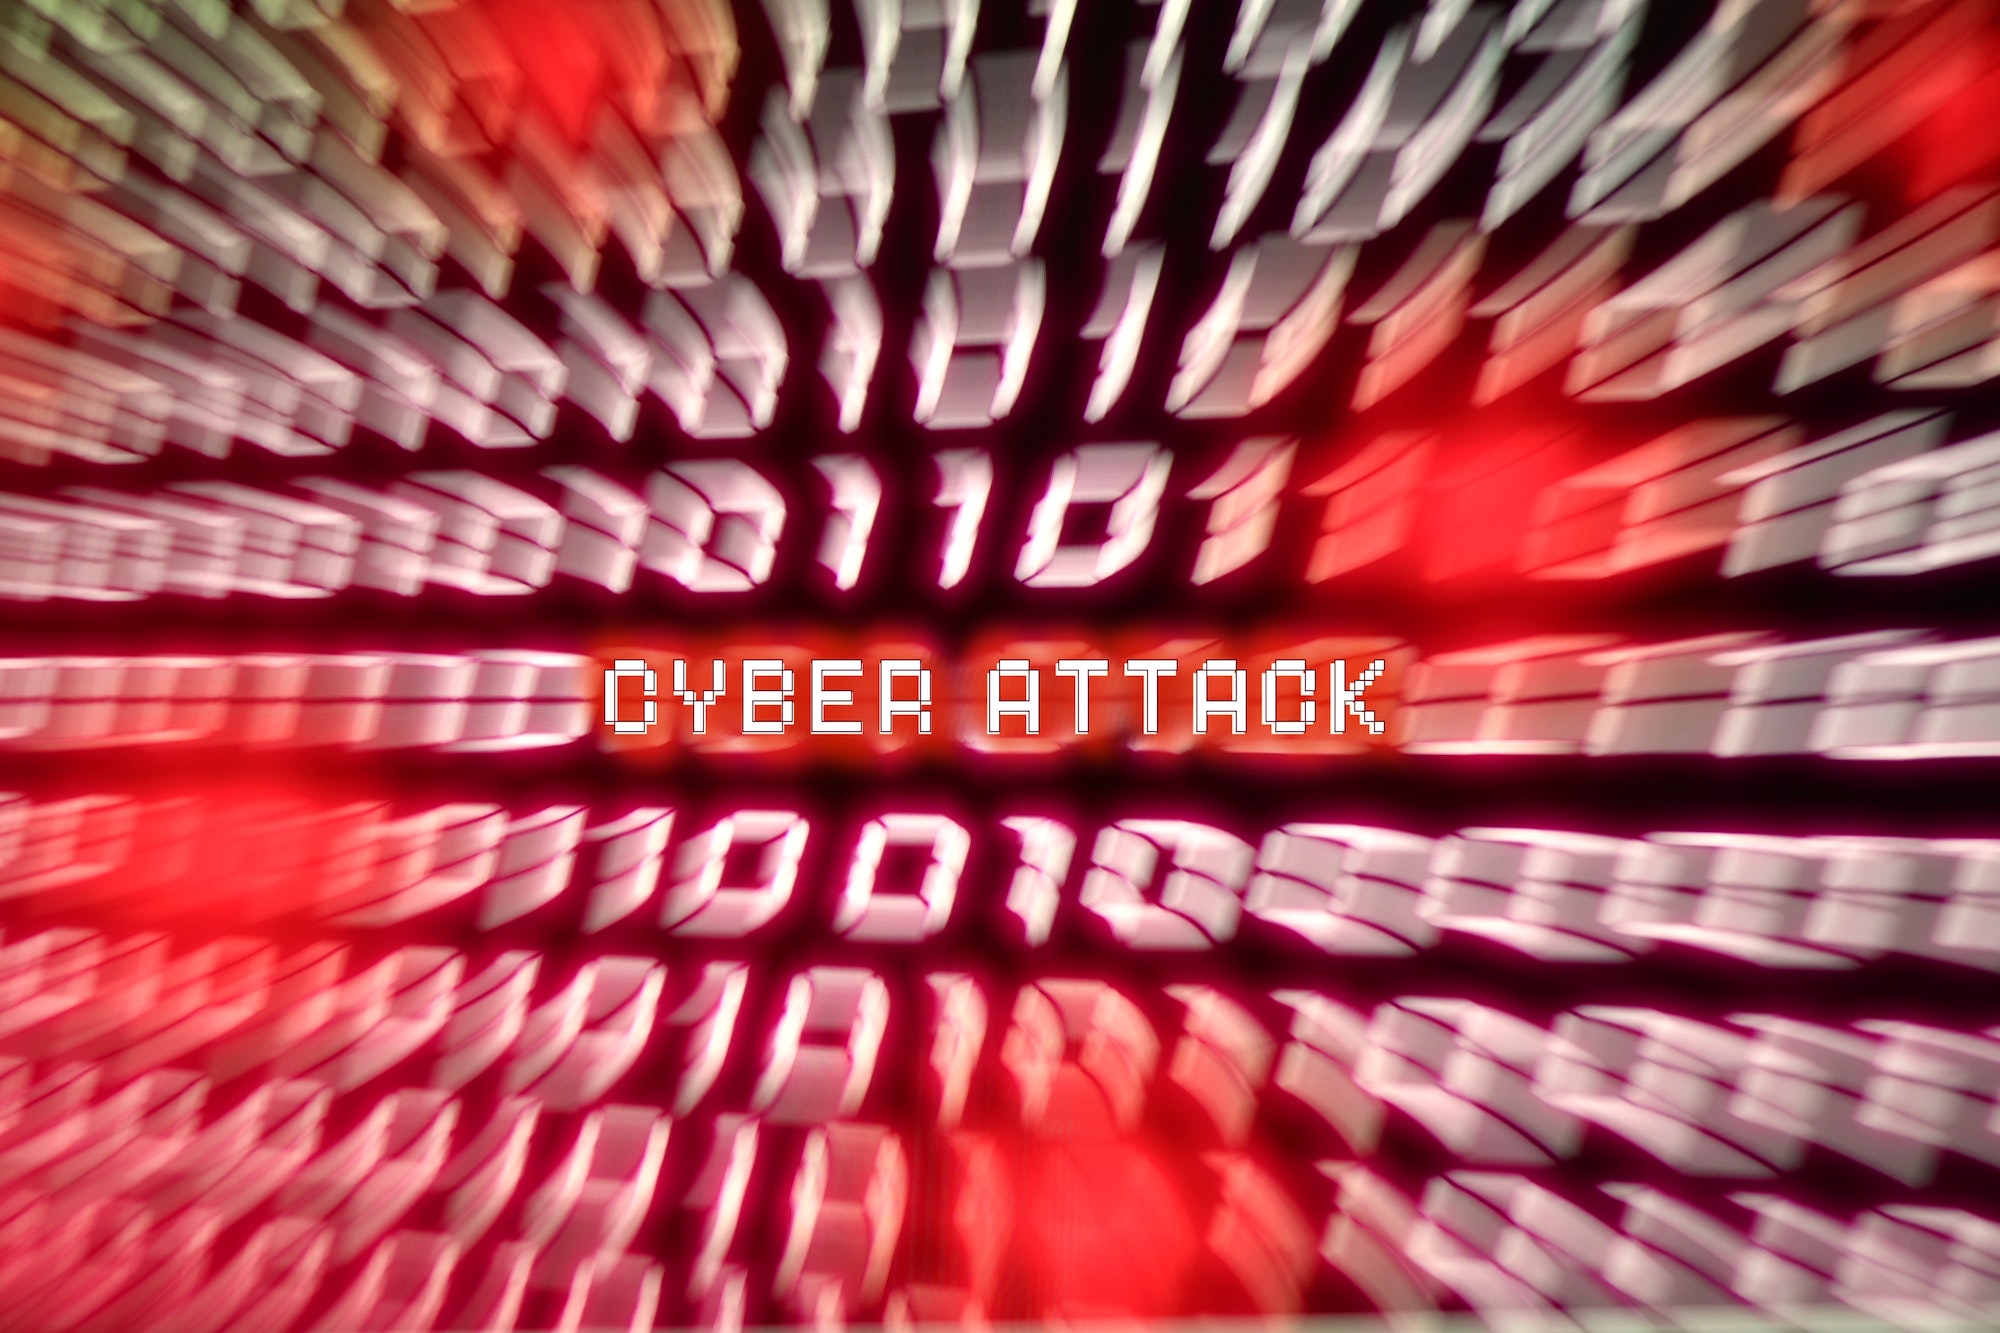 Suspected Cyber Attack